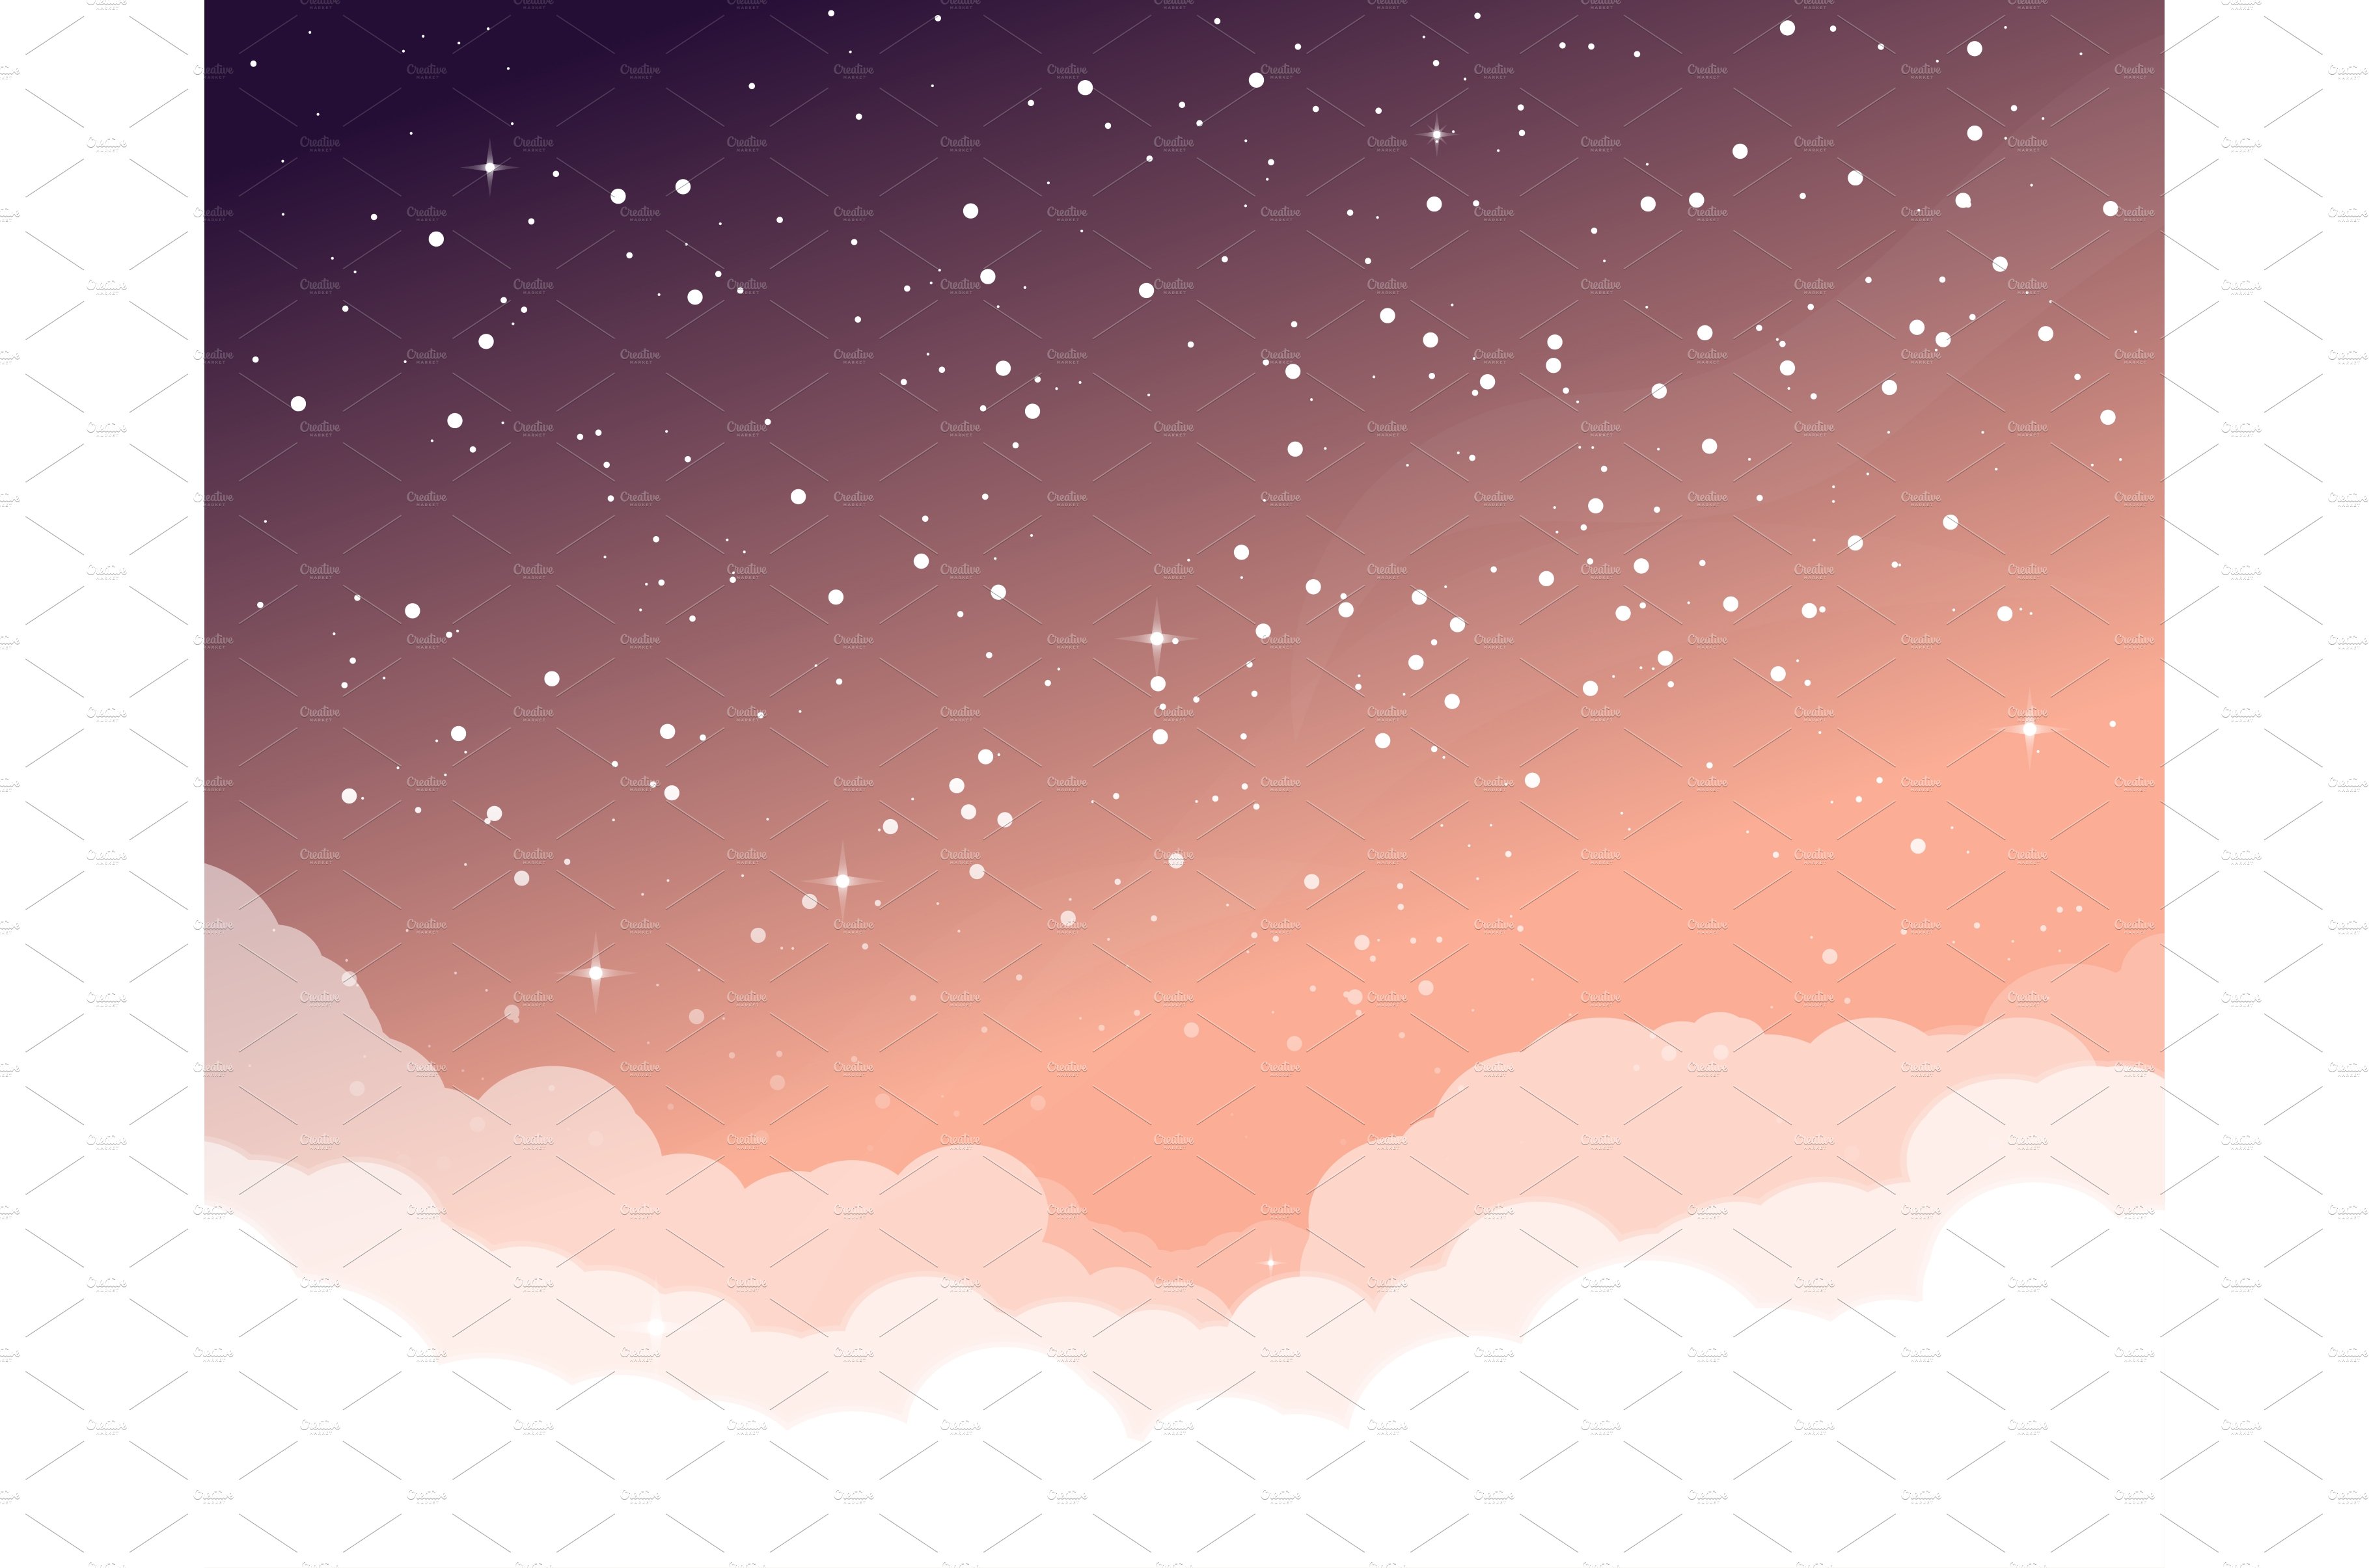 Sky with clouds and stars cover image.